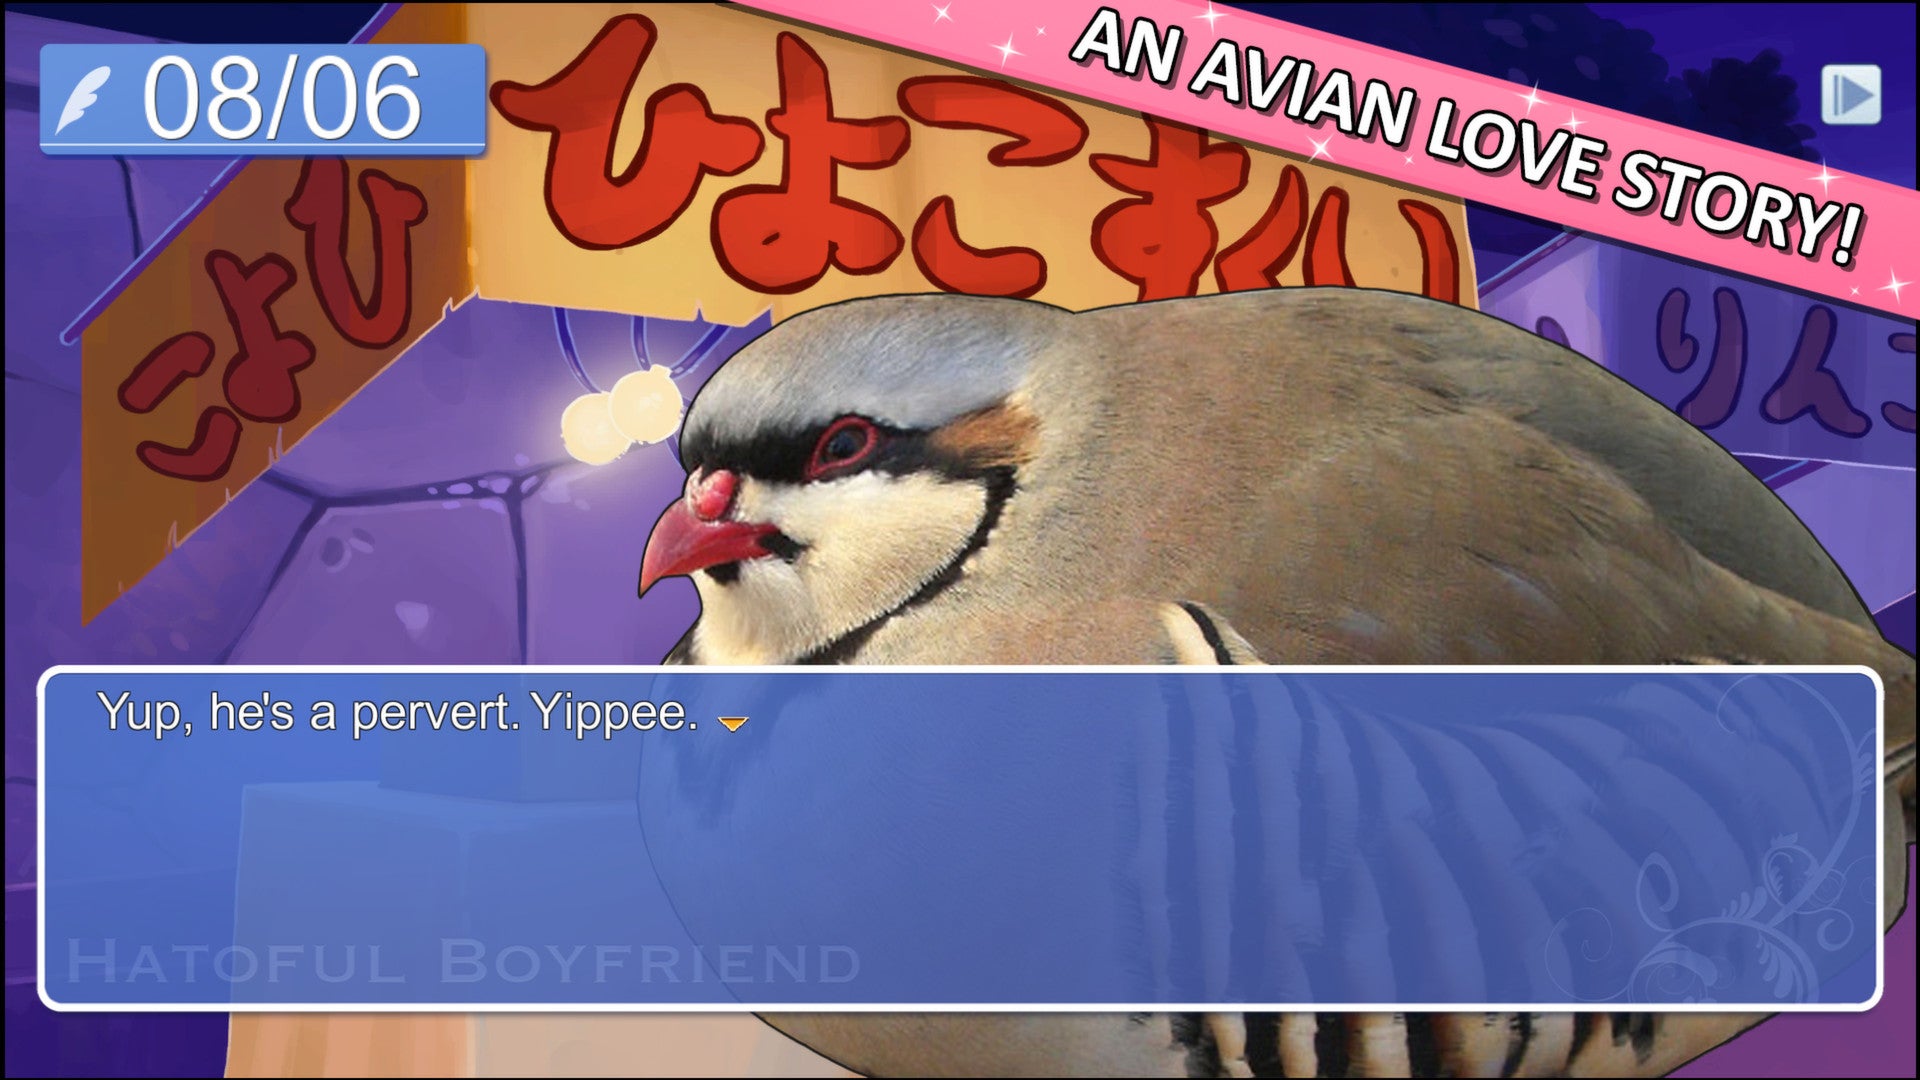 Dateable character Shuu (in his main/pigeon form) calls out a character for being a pervert in a snippet of dialogue from Hatoful Boyfriend, accompanied by a marketing banner reading "An Avian Love Story!"